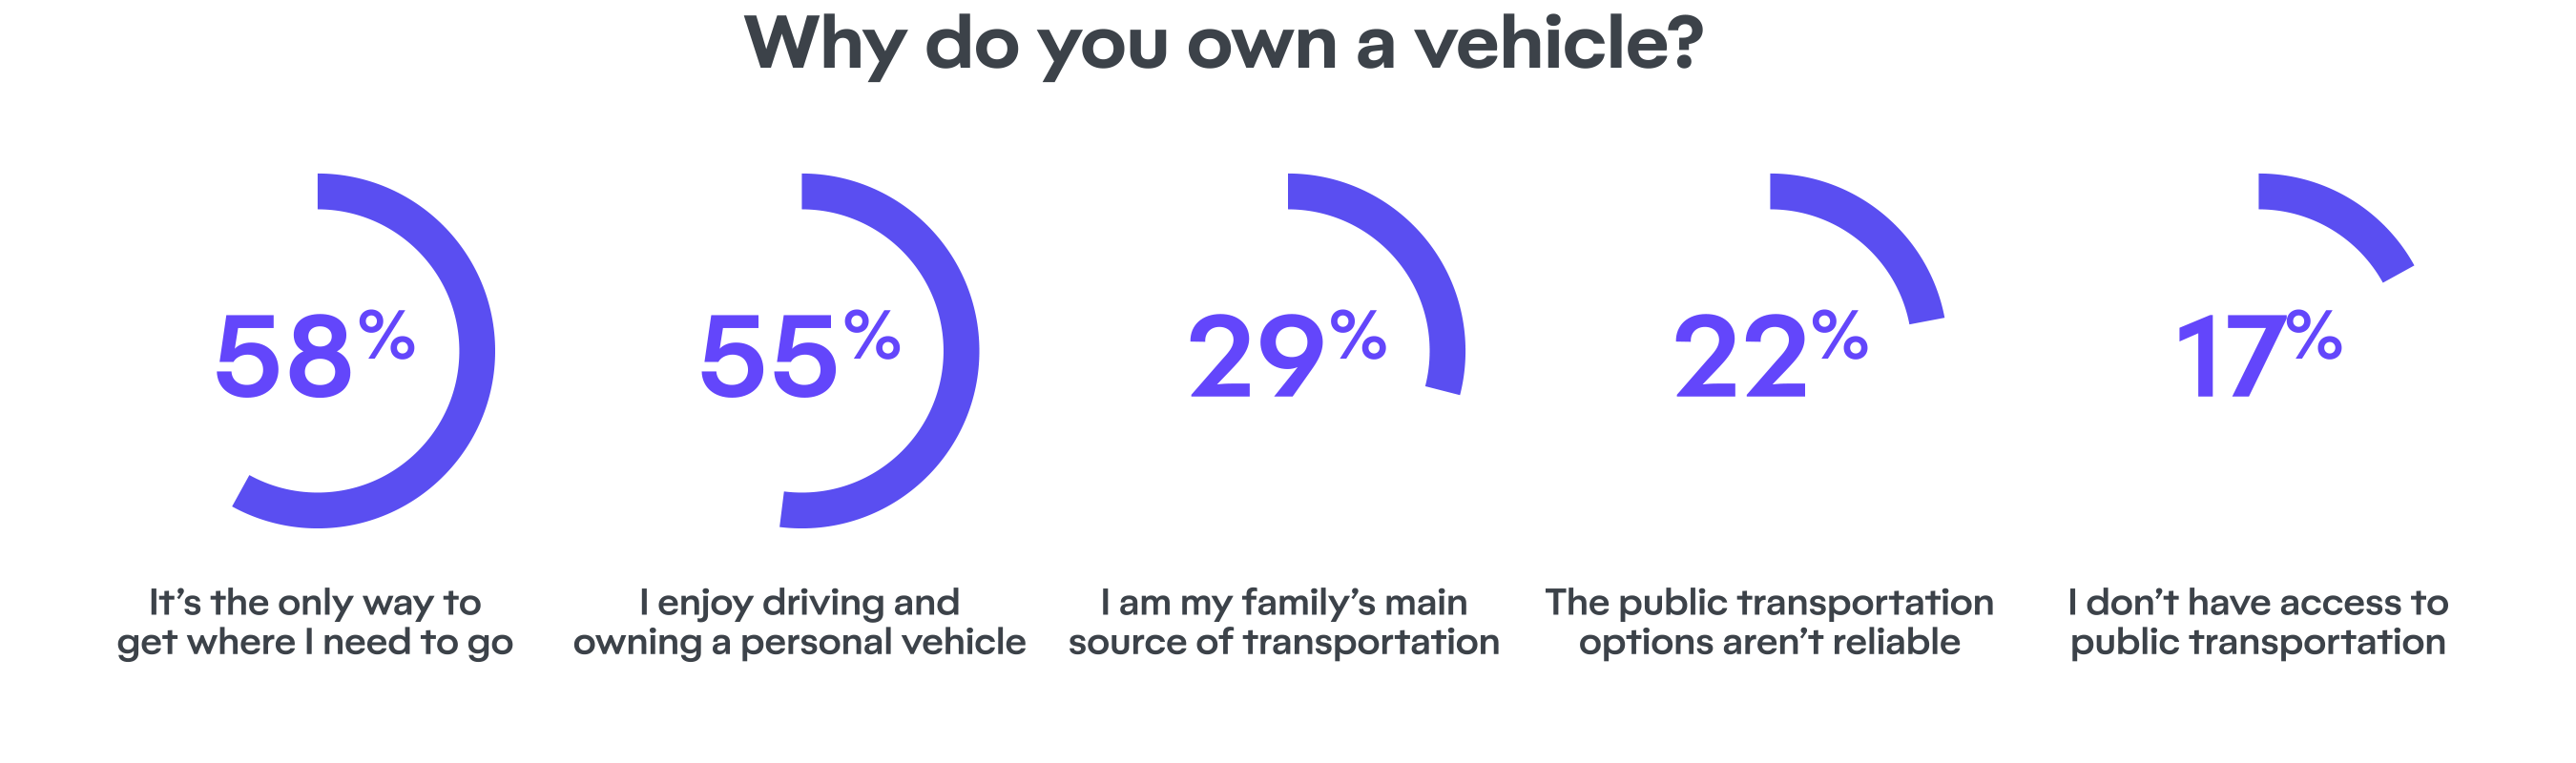 5 graphs showing the various ways people responded to the question: why do you own a vehicle? It's the only way to get where I need to go 58%, I enjoy driving and owning a personal vehicle 55%, I am my family's main source of transportation 29%, The public transportation options aren't reliable 22%, I don't have access to public transportation 17%. 